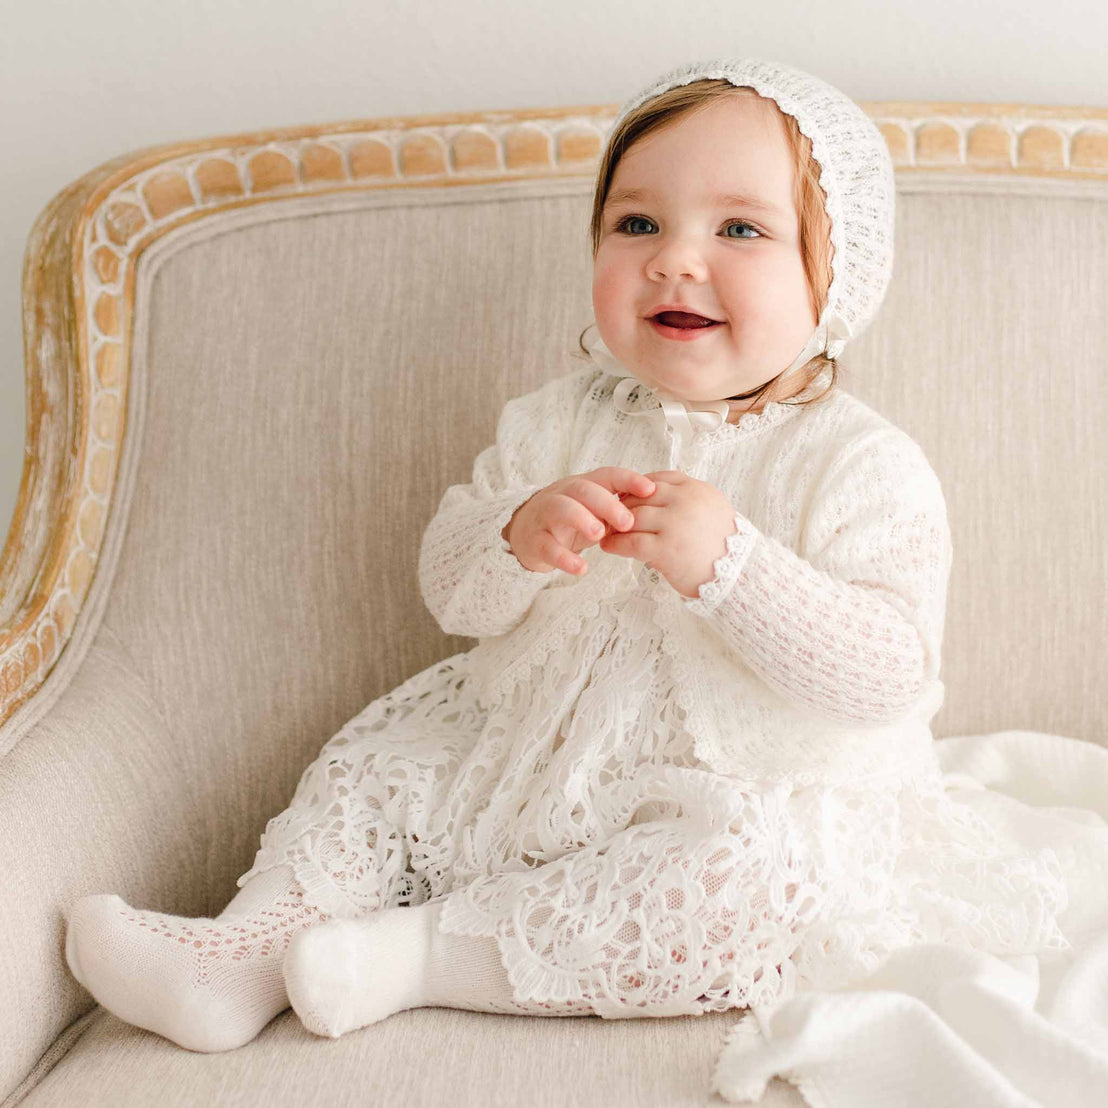 Baby girl wearing the Lola Knit Sweater and Bonnet that matches the Lola Christening Gown, Dress and Romper. Made of 100% ivory knit acrylic in light ivory, a soft and breathable knit.